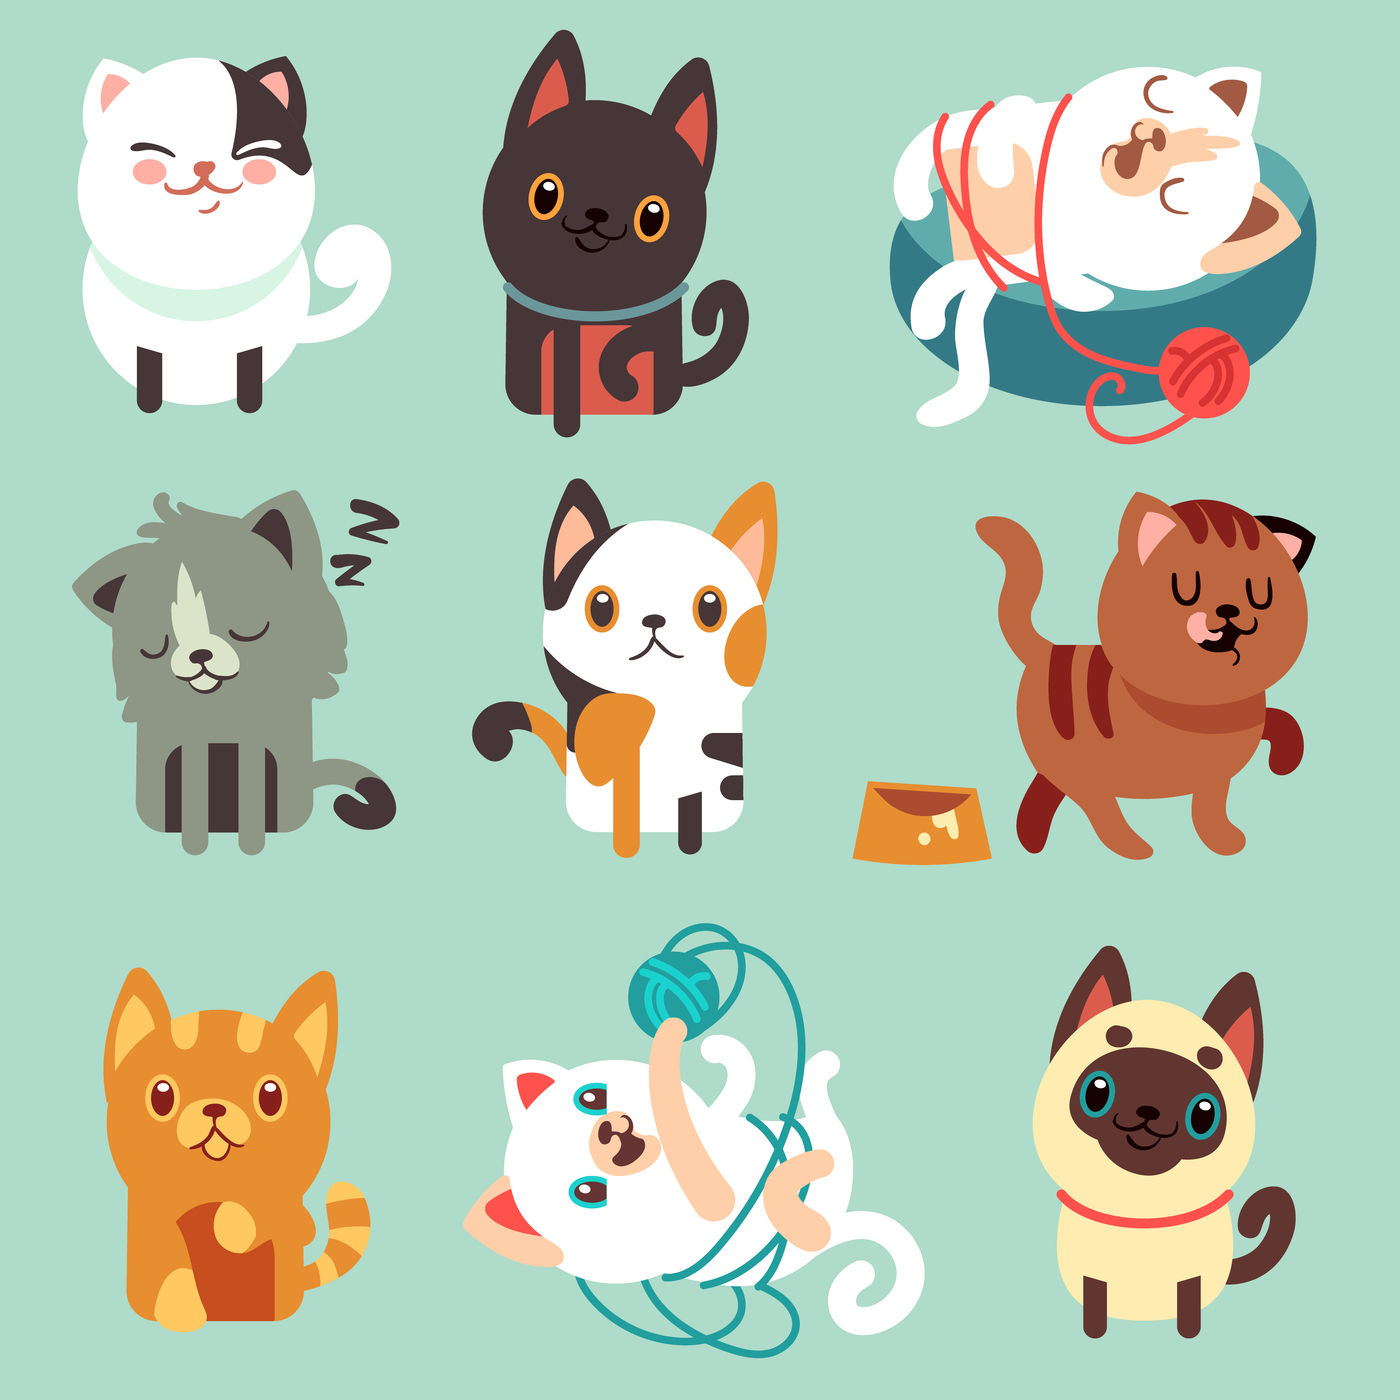 Cute cartoon cats, funny playful kittens vector set By Microvector